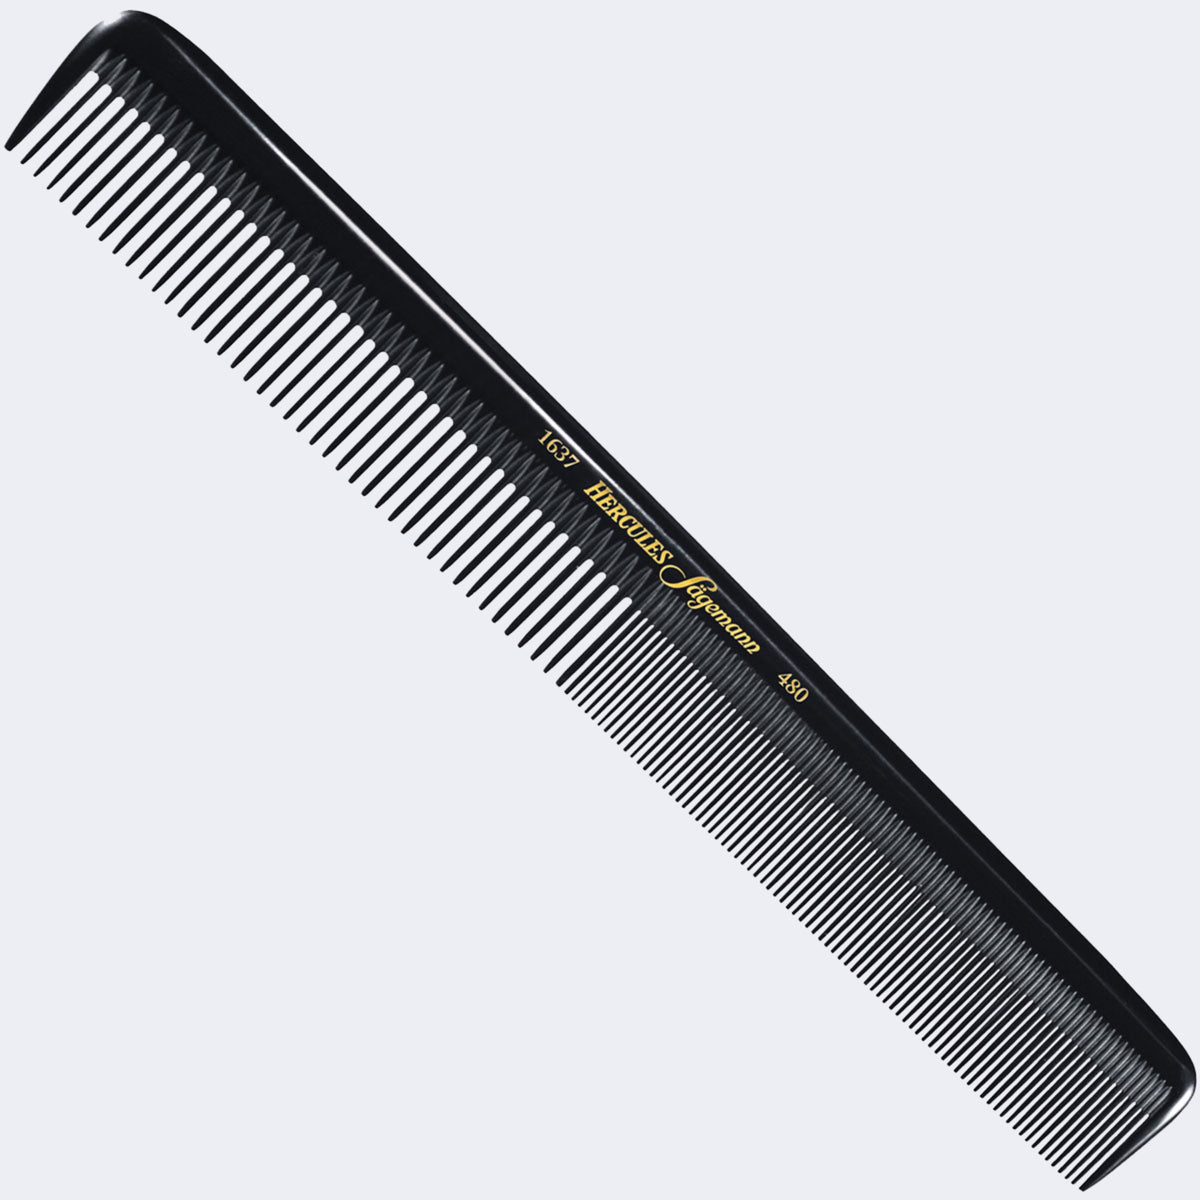 8.5" STYLING COMB FOR BARBERS